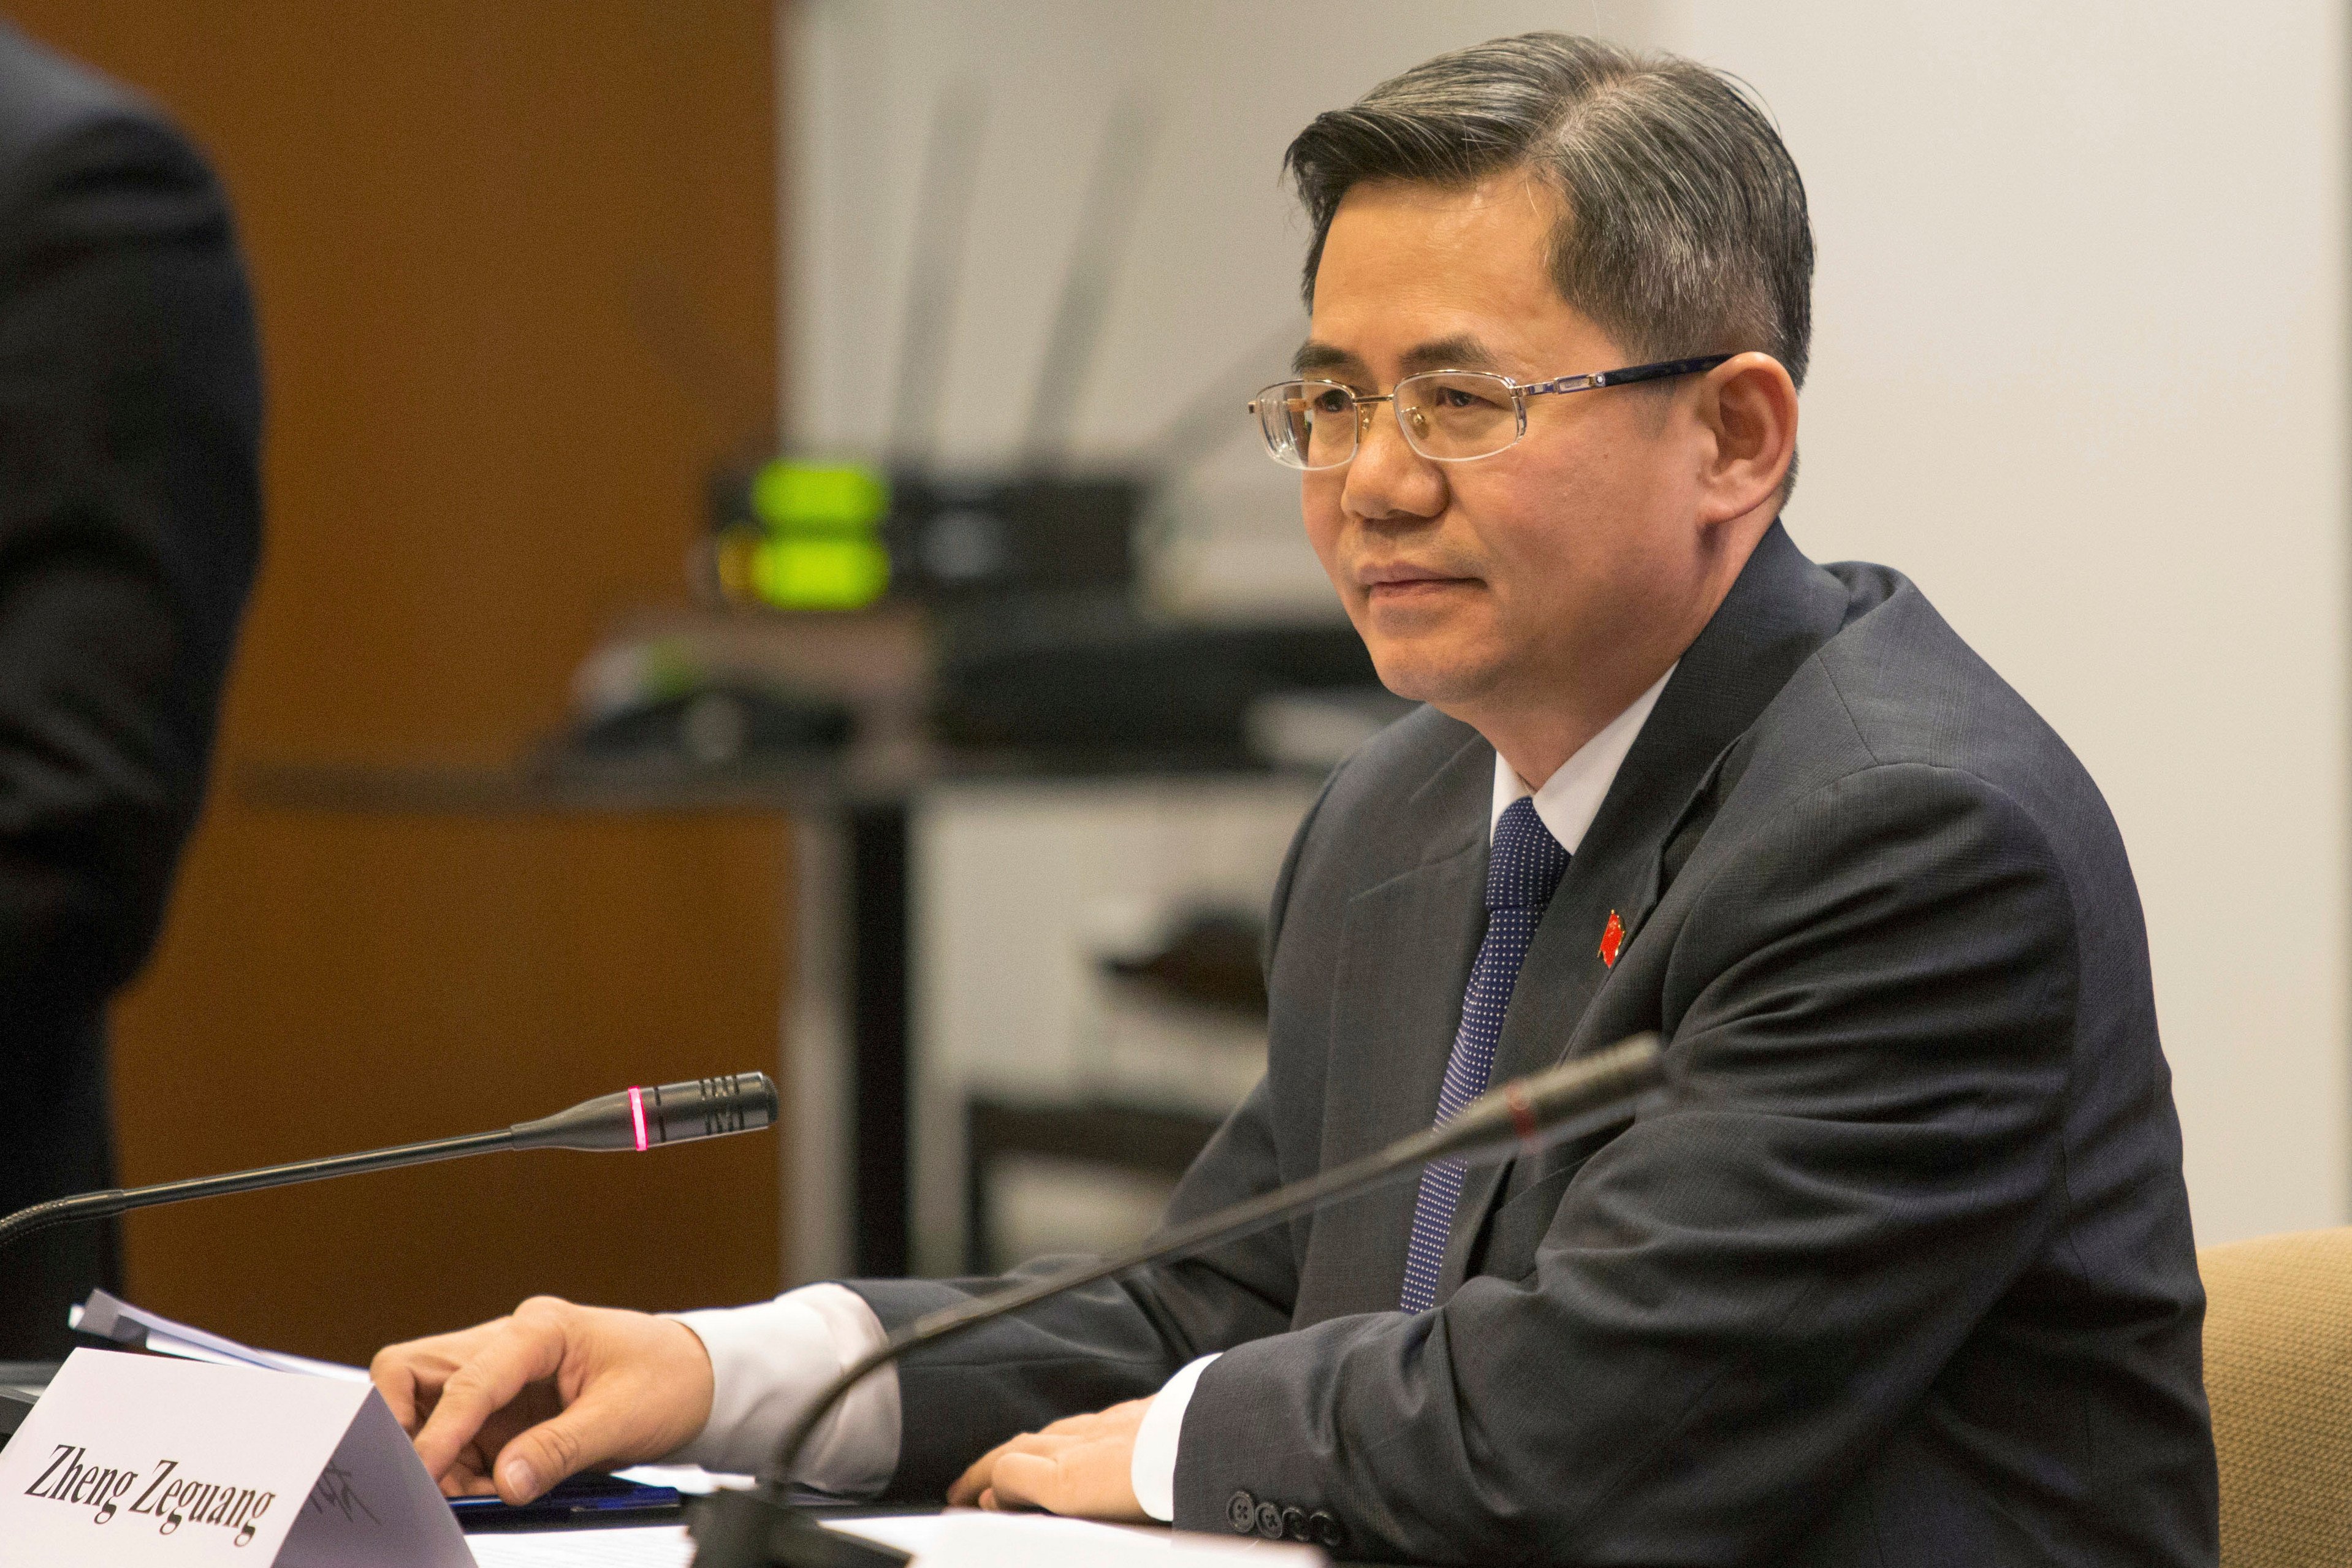 Zheng Zeguang, the mainland Chinese ambassador to the UK, has been asked to a meeting with the British foreign office after the arrest of three men linked to Hong Kong’s London trade office on spying charges. Photo: AP
